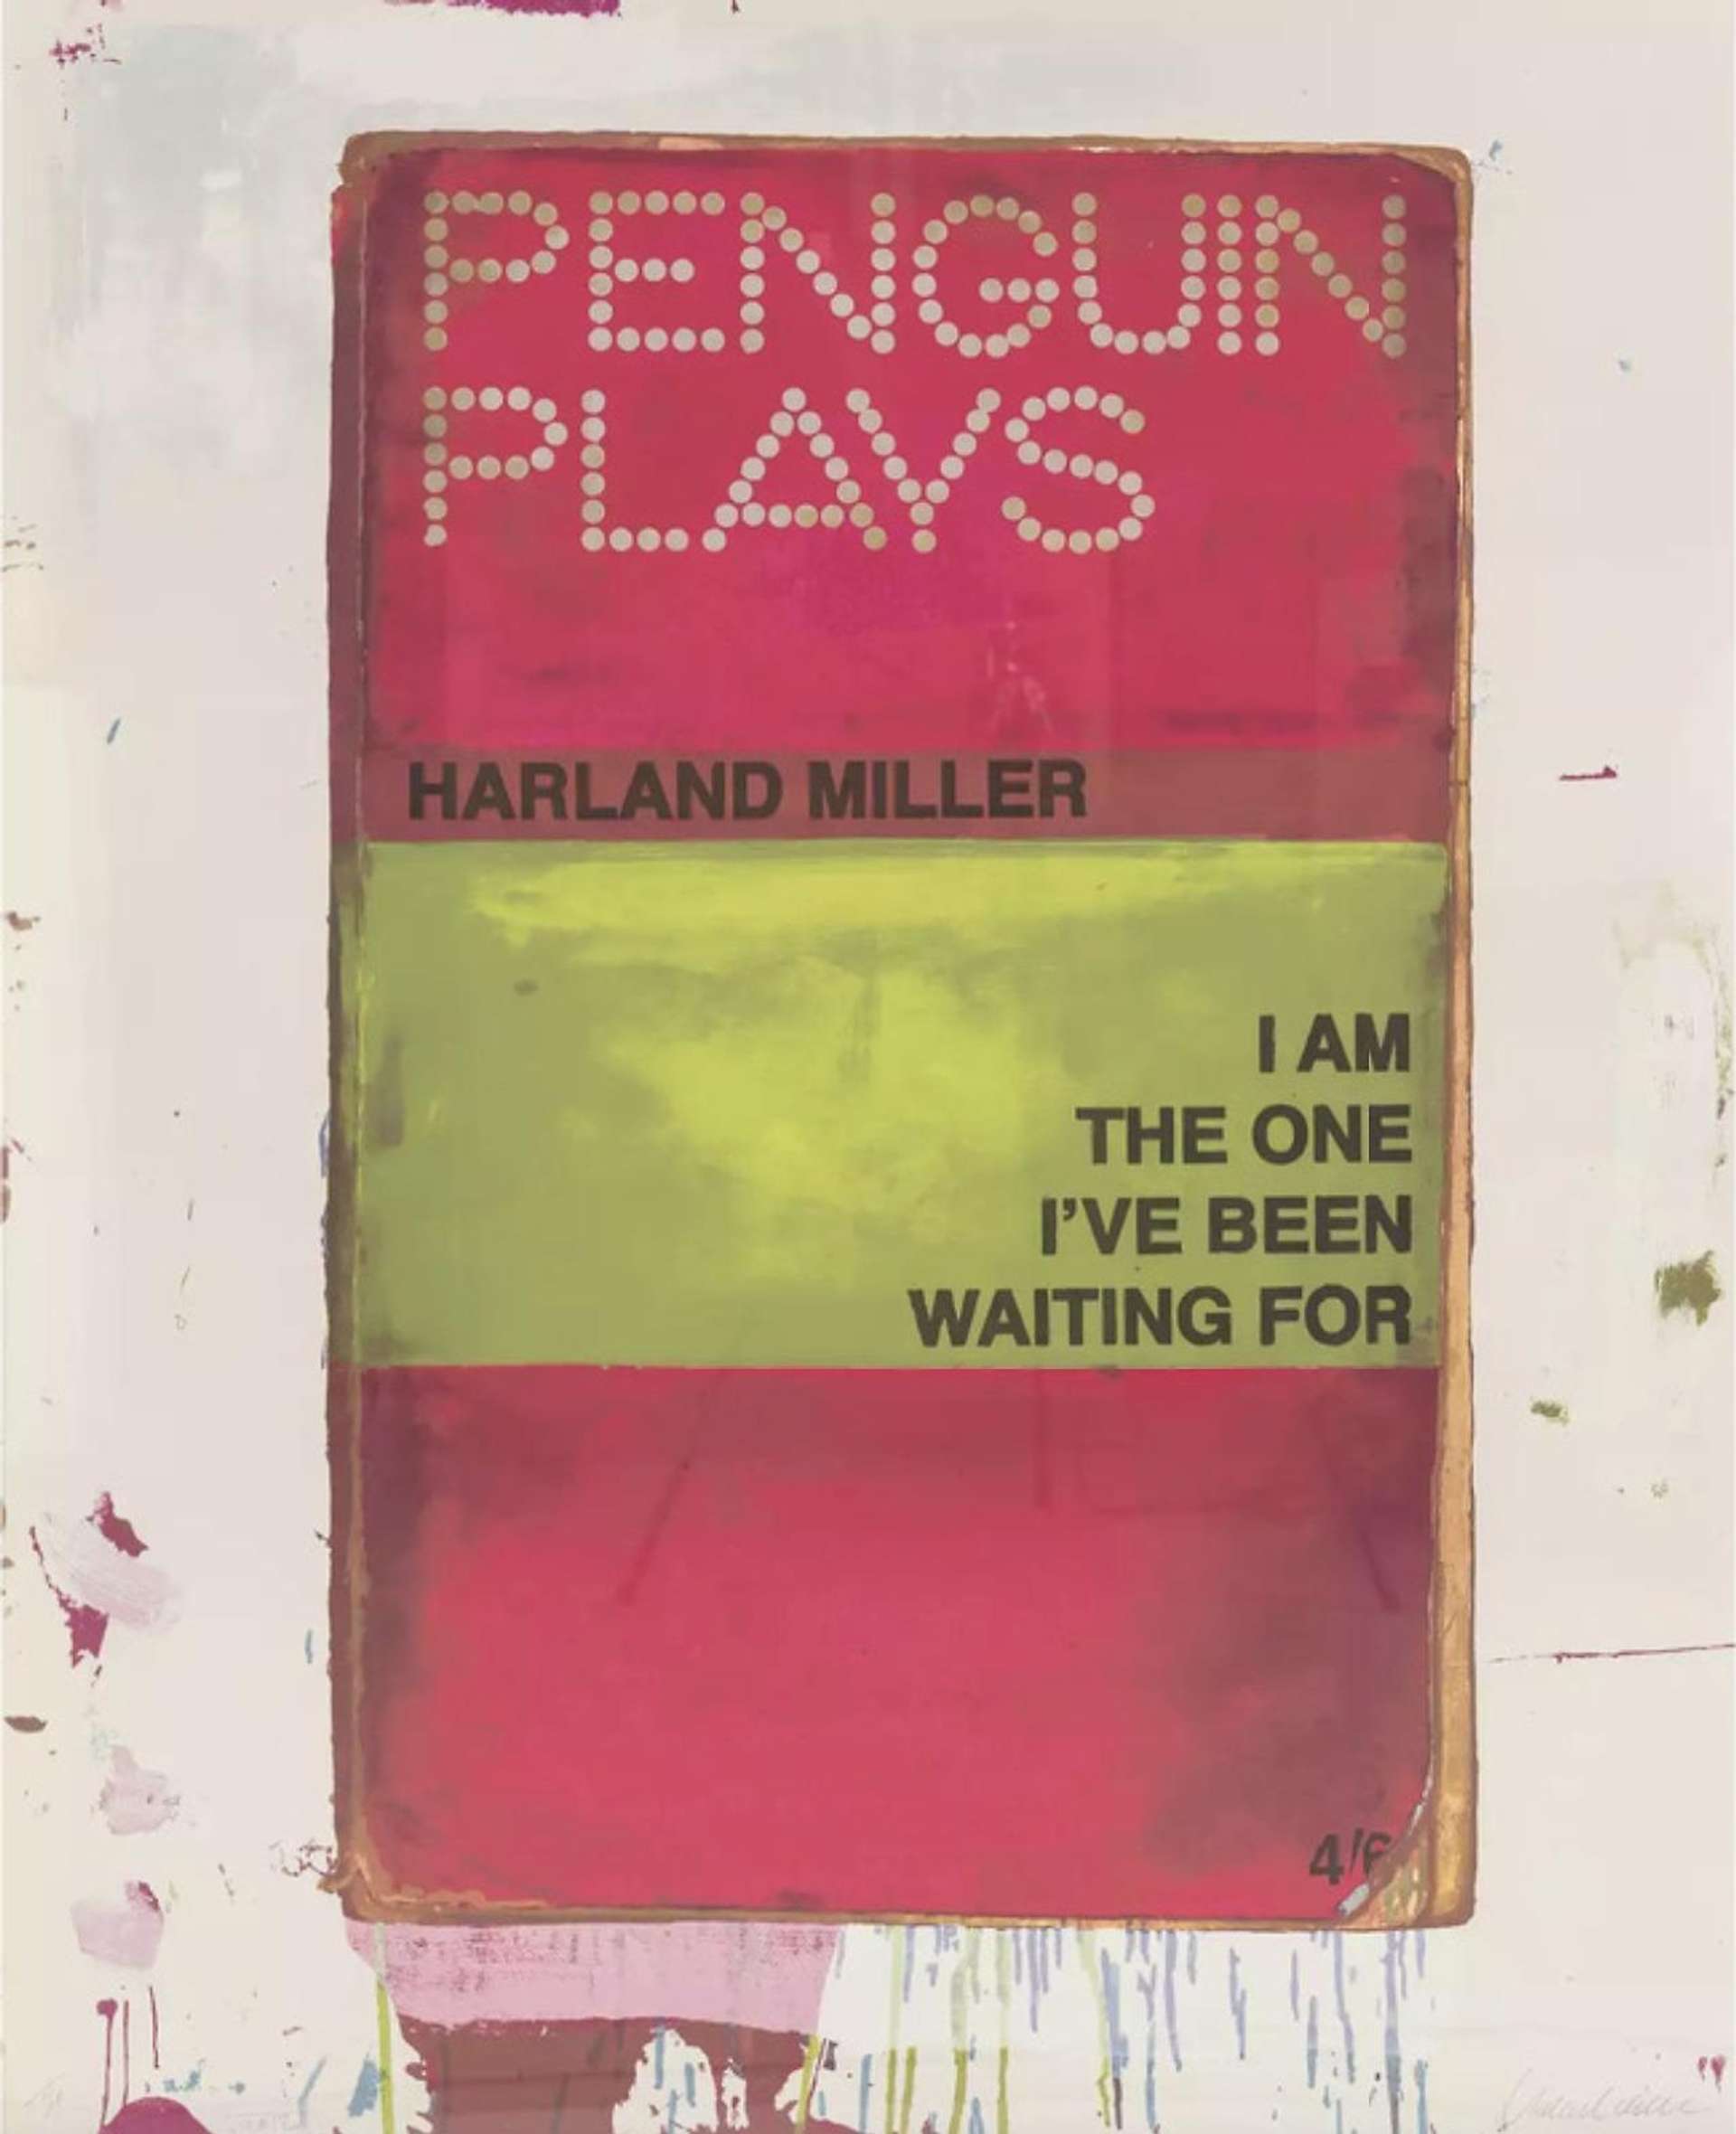 Harland Miller: I Am The One I’ve Been Waiting For (red and yellow) - Signed Print